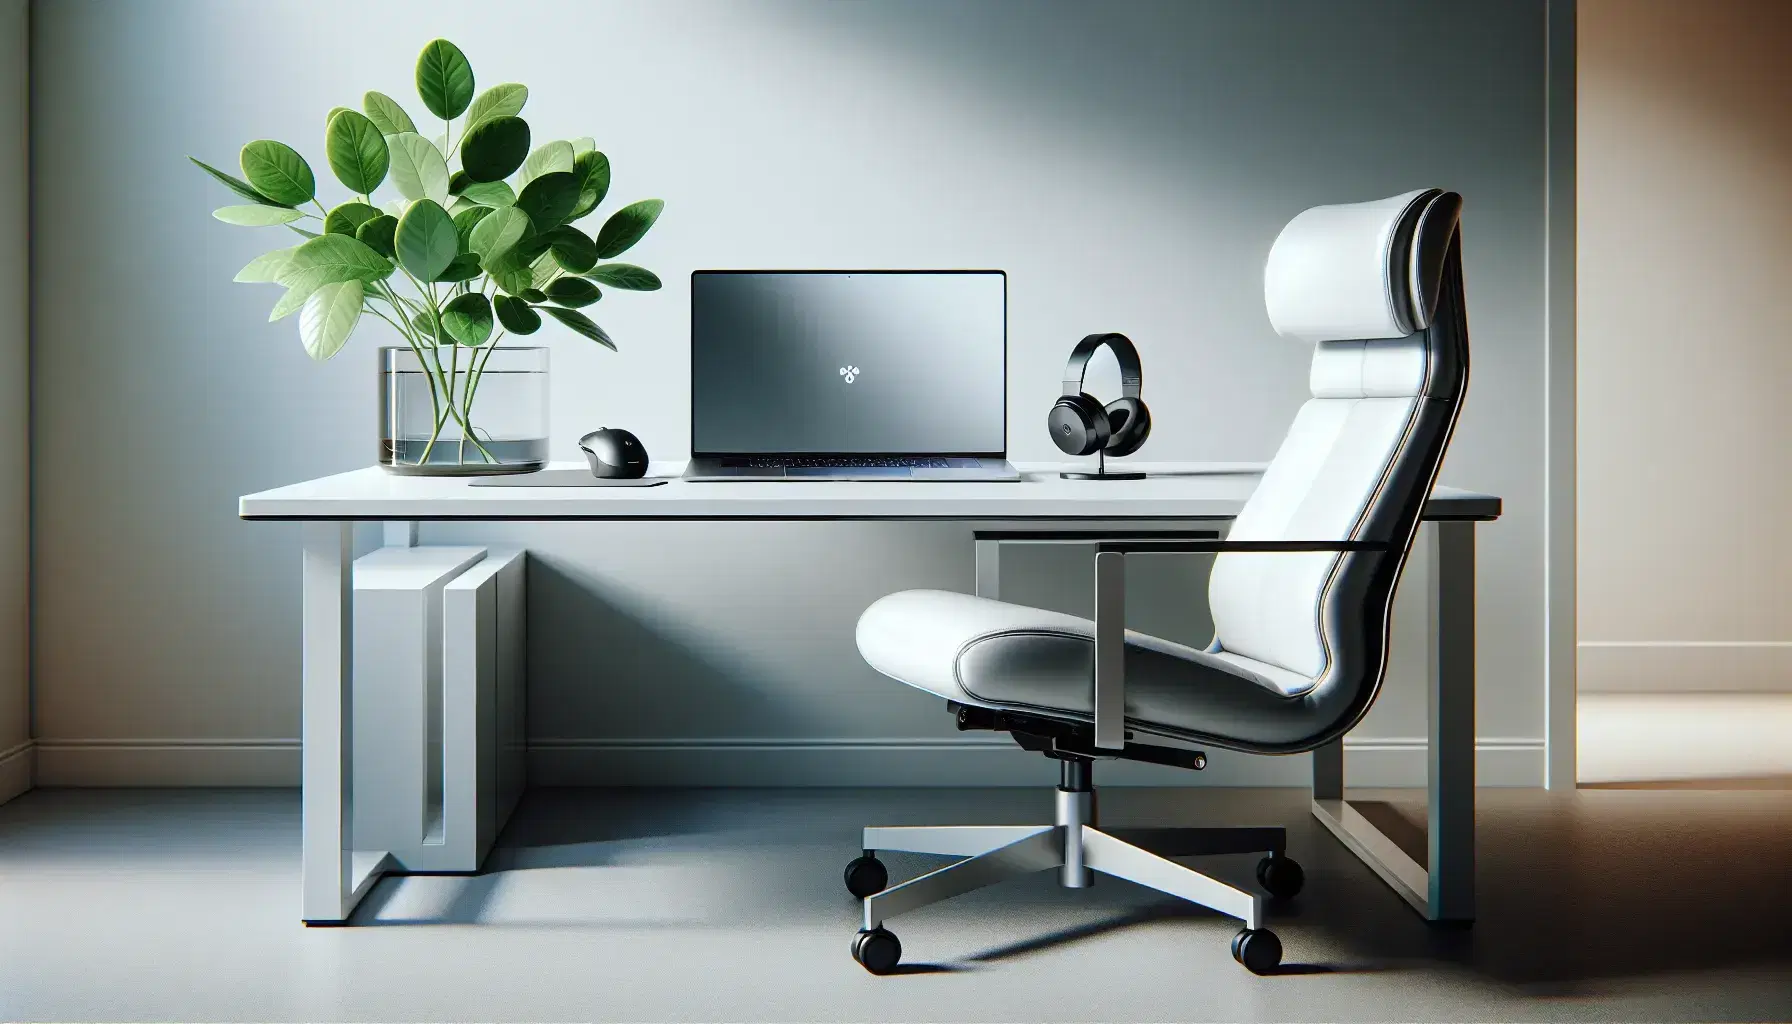 Modern home office with white desk, silver laptop, black wireless mouse, green potted plant, and white adjustable chair in a softly lit room.